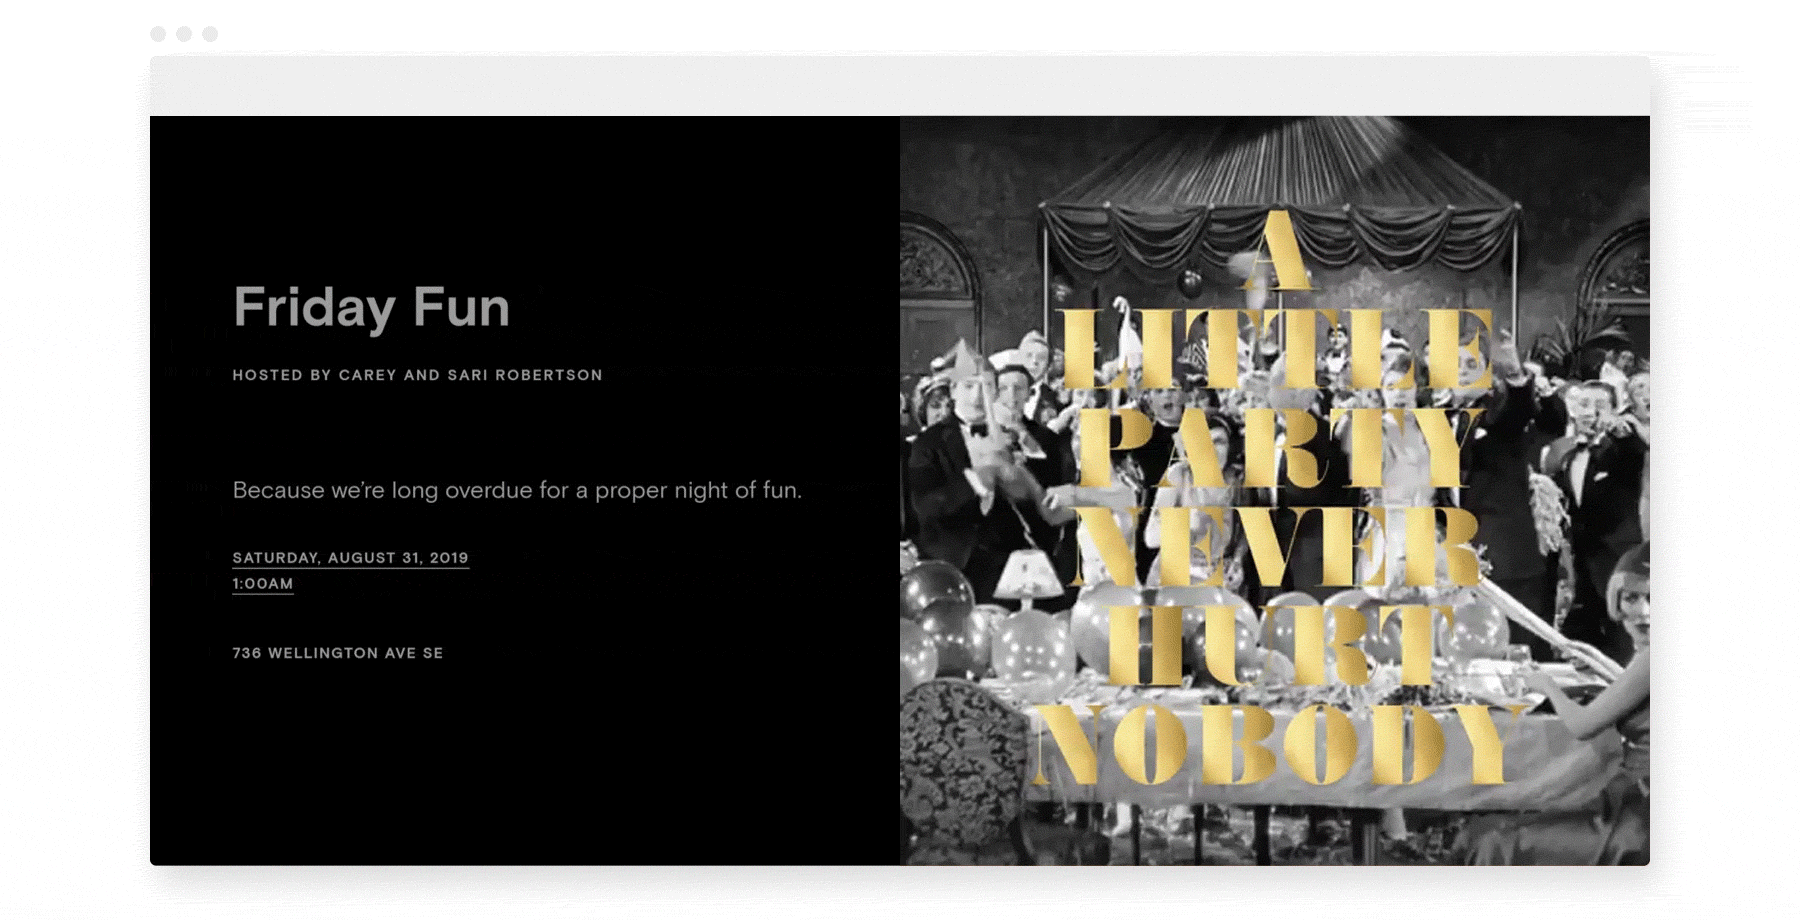 “Brushed Gold Letters” Flyer featuring a black and white party scene and gold text overlaid that reads “A little party never hurt nobody.”